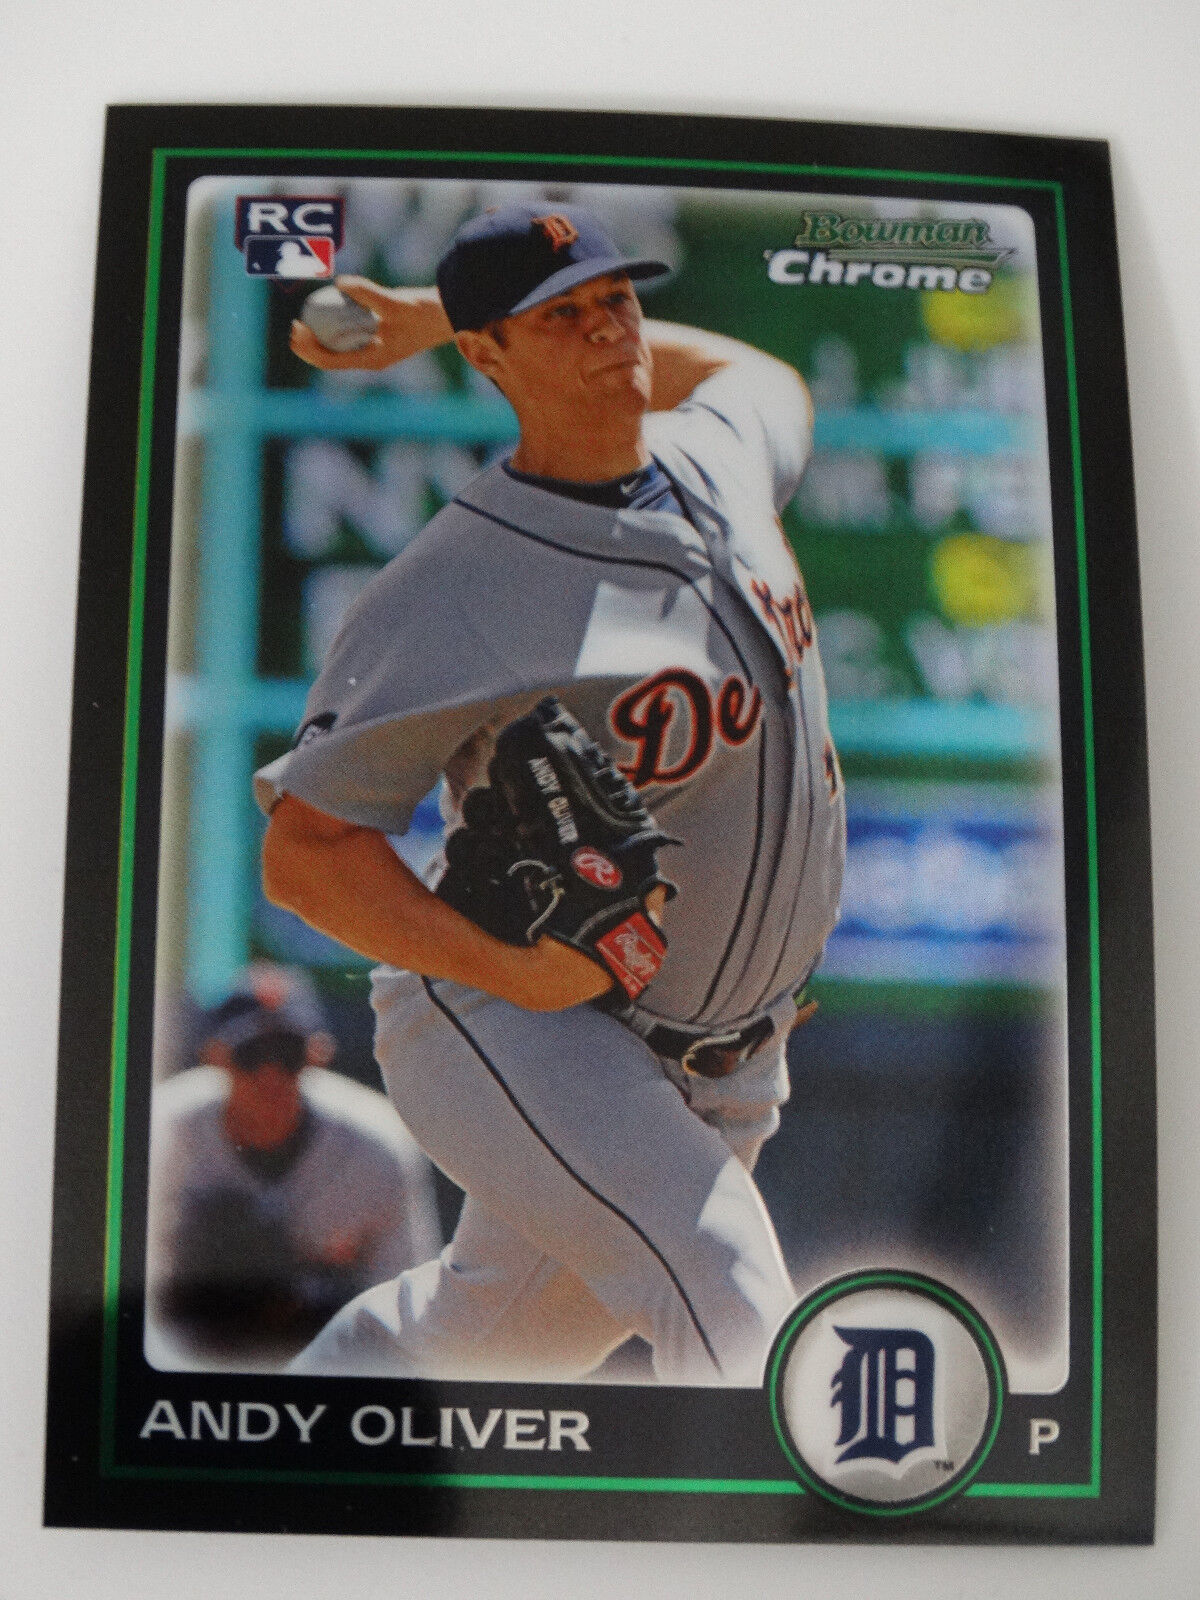 2010 Bowman Chrome #217 Andy Oliver Detroit Tigers Rookie RC Baseball Card. rookie card picture